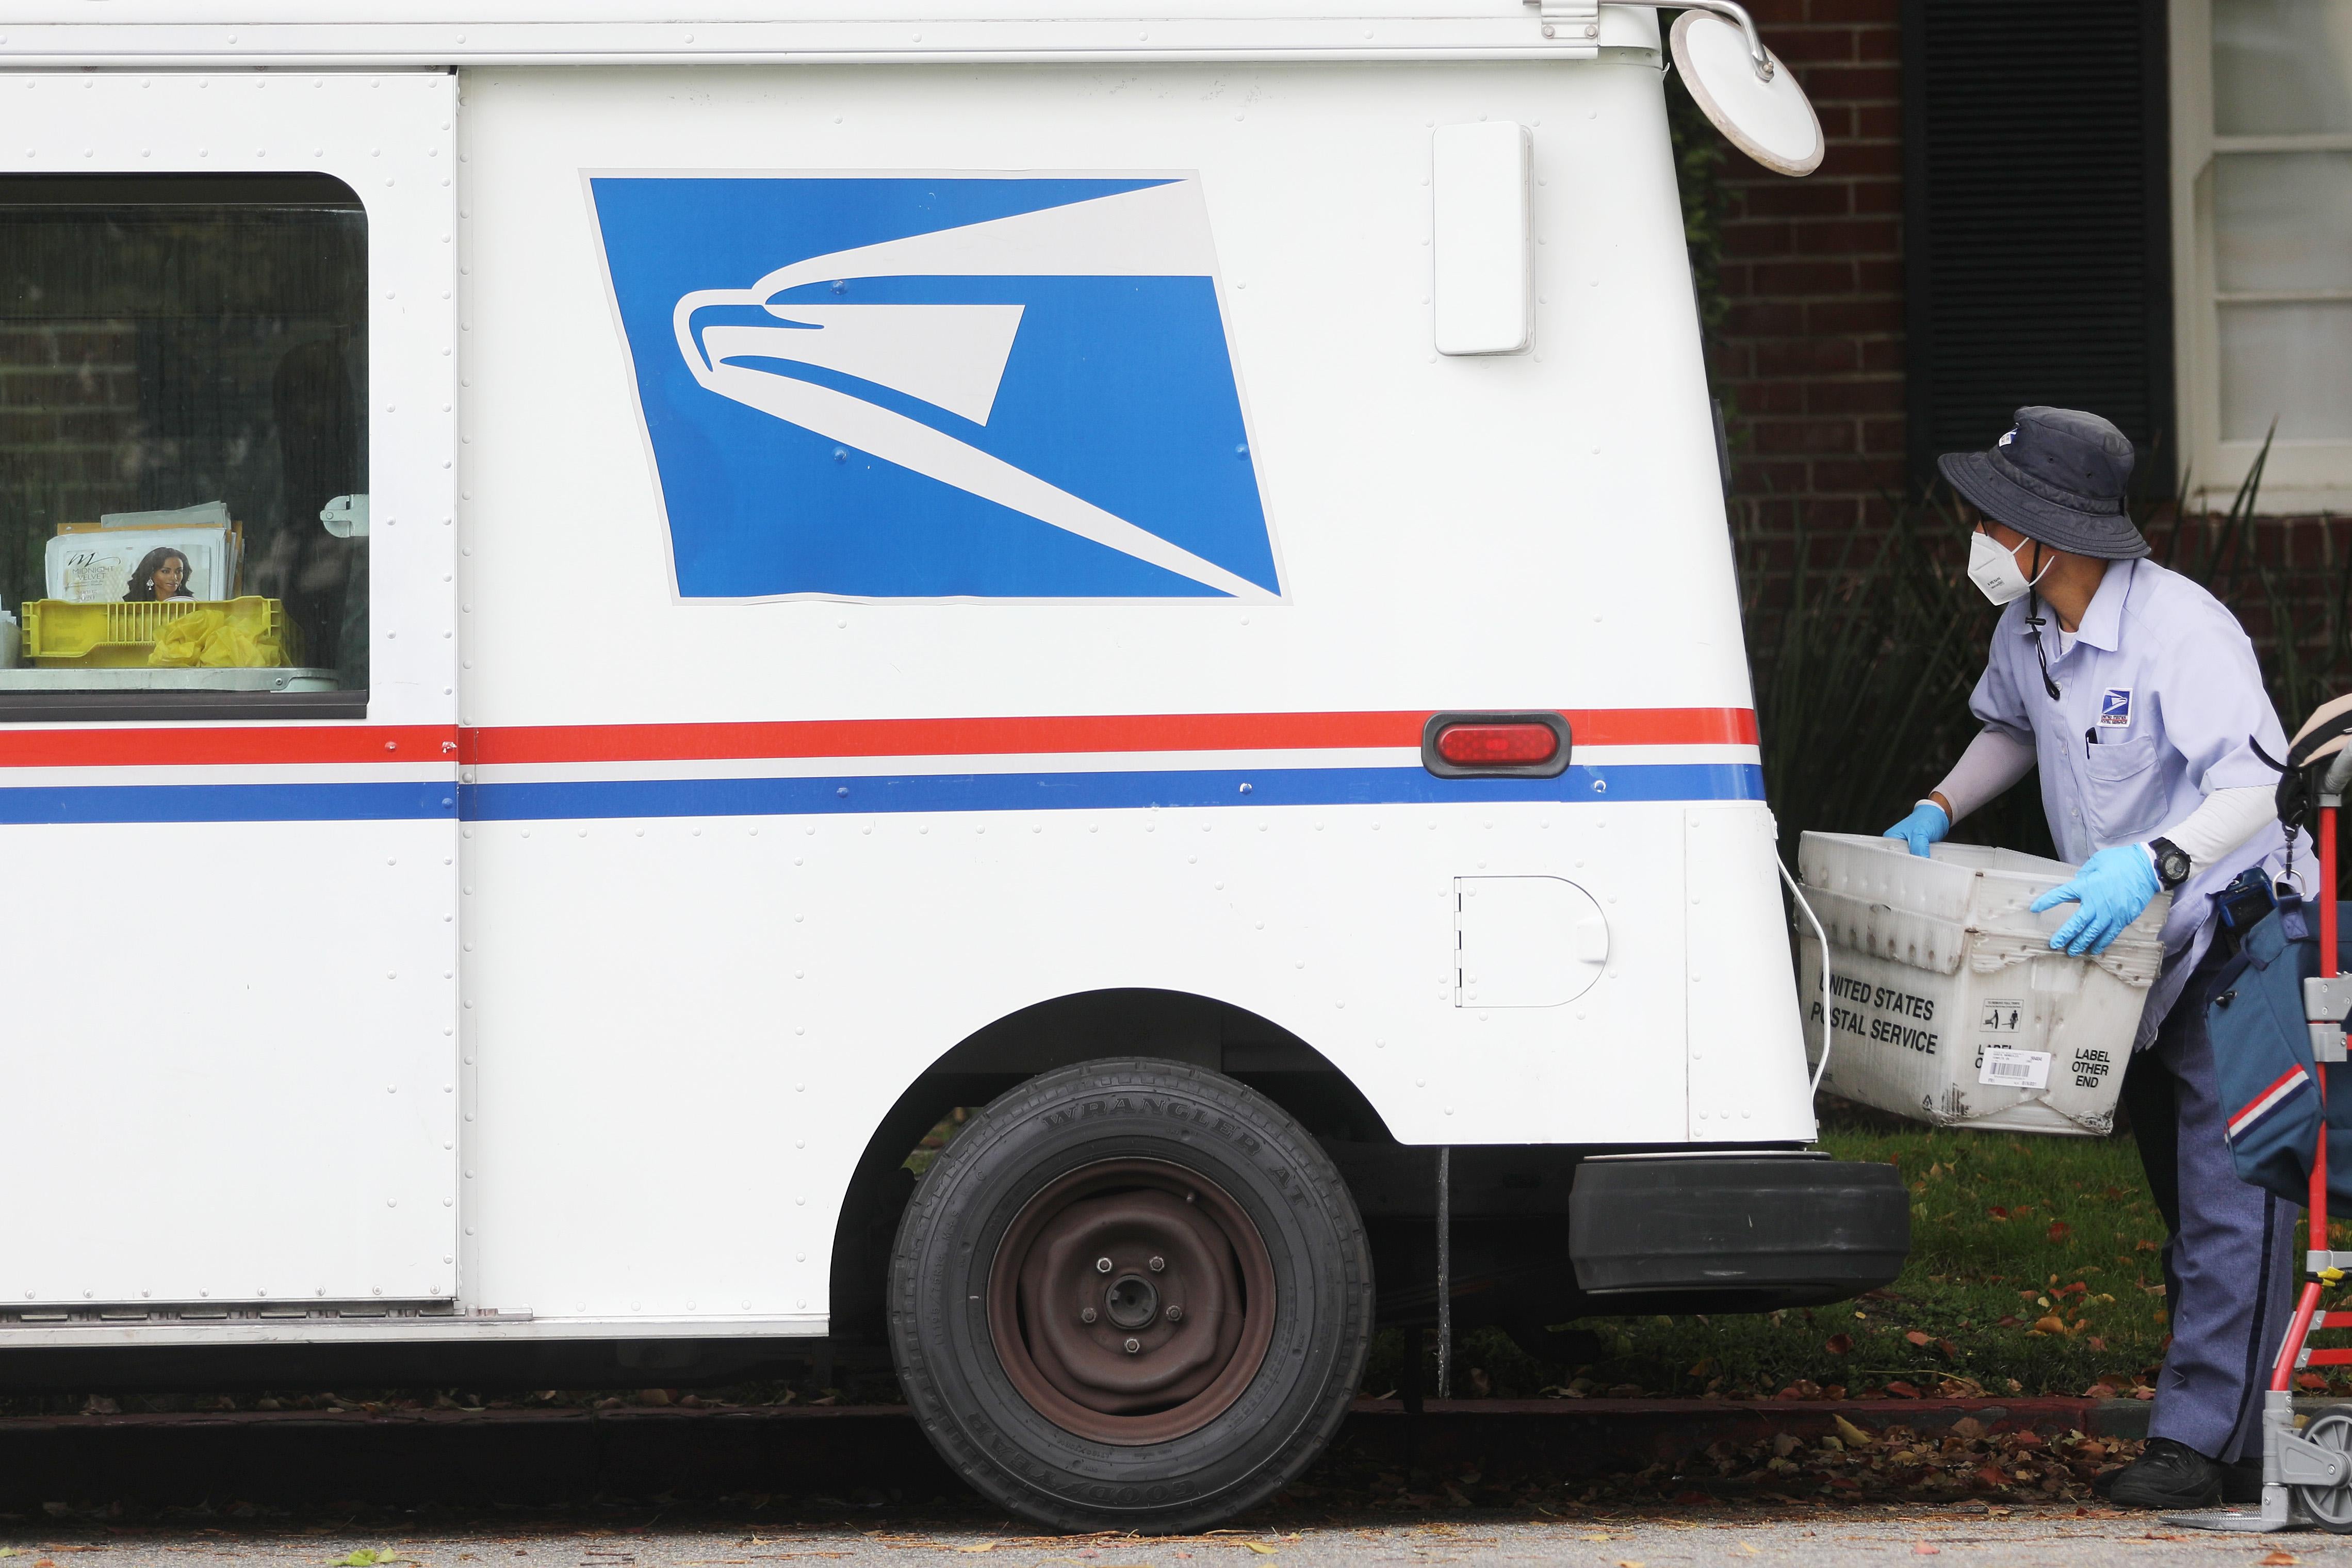 A postal worker wears gloves and a mask while carrying a mail bin near a truck.